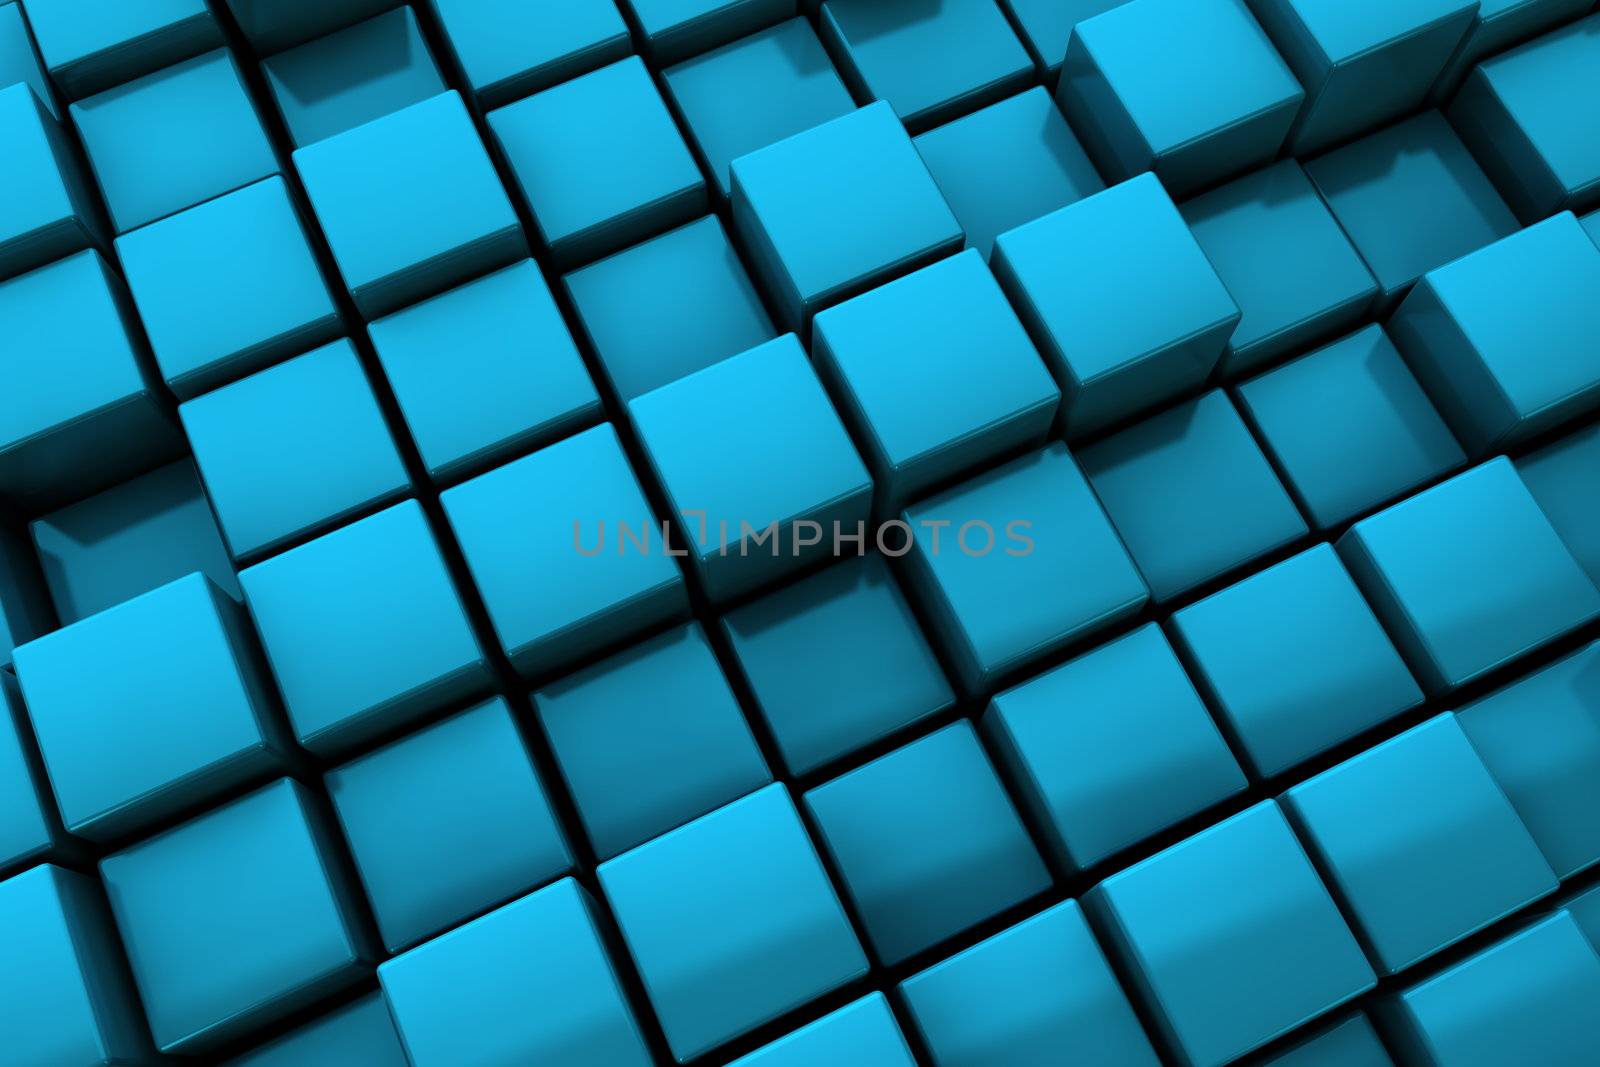 blue cubes with metallic surface make a cool business backdrop pattern